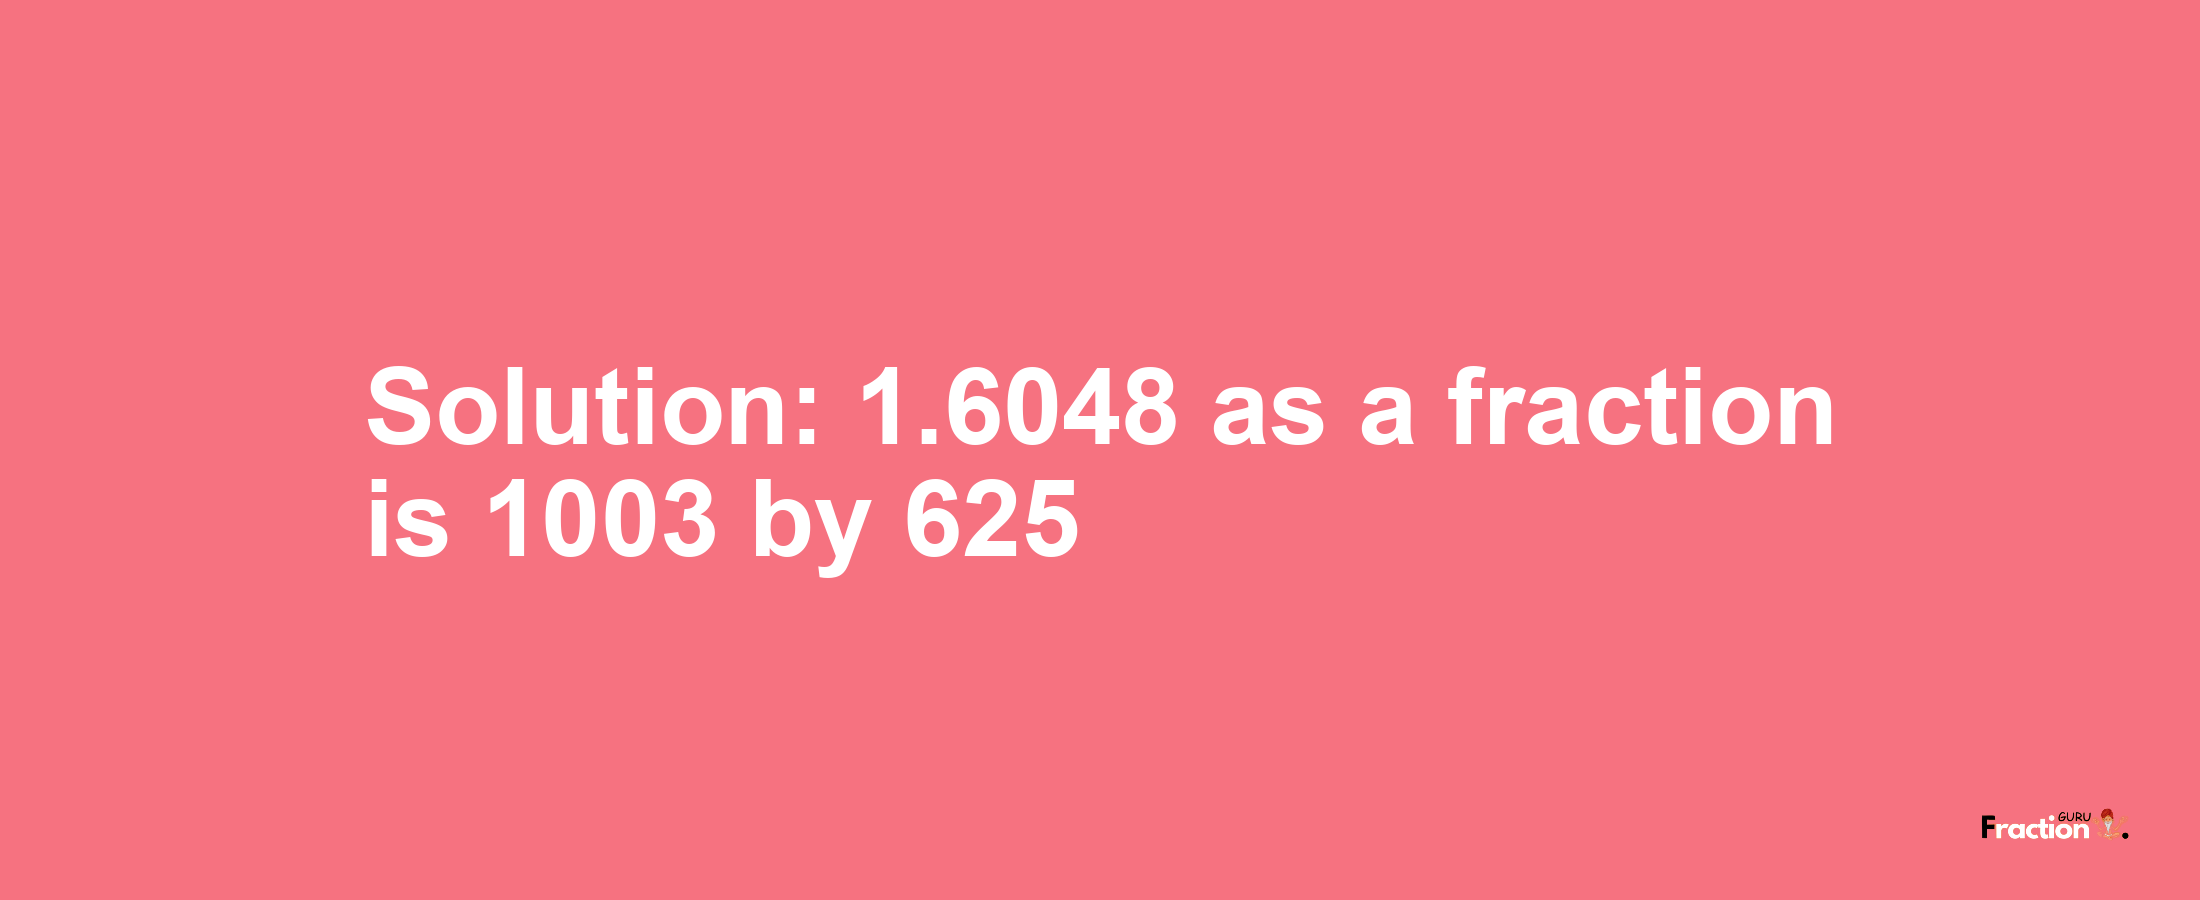 Solution:1.6048 as a fraction is 1003/625